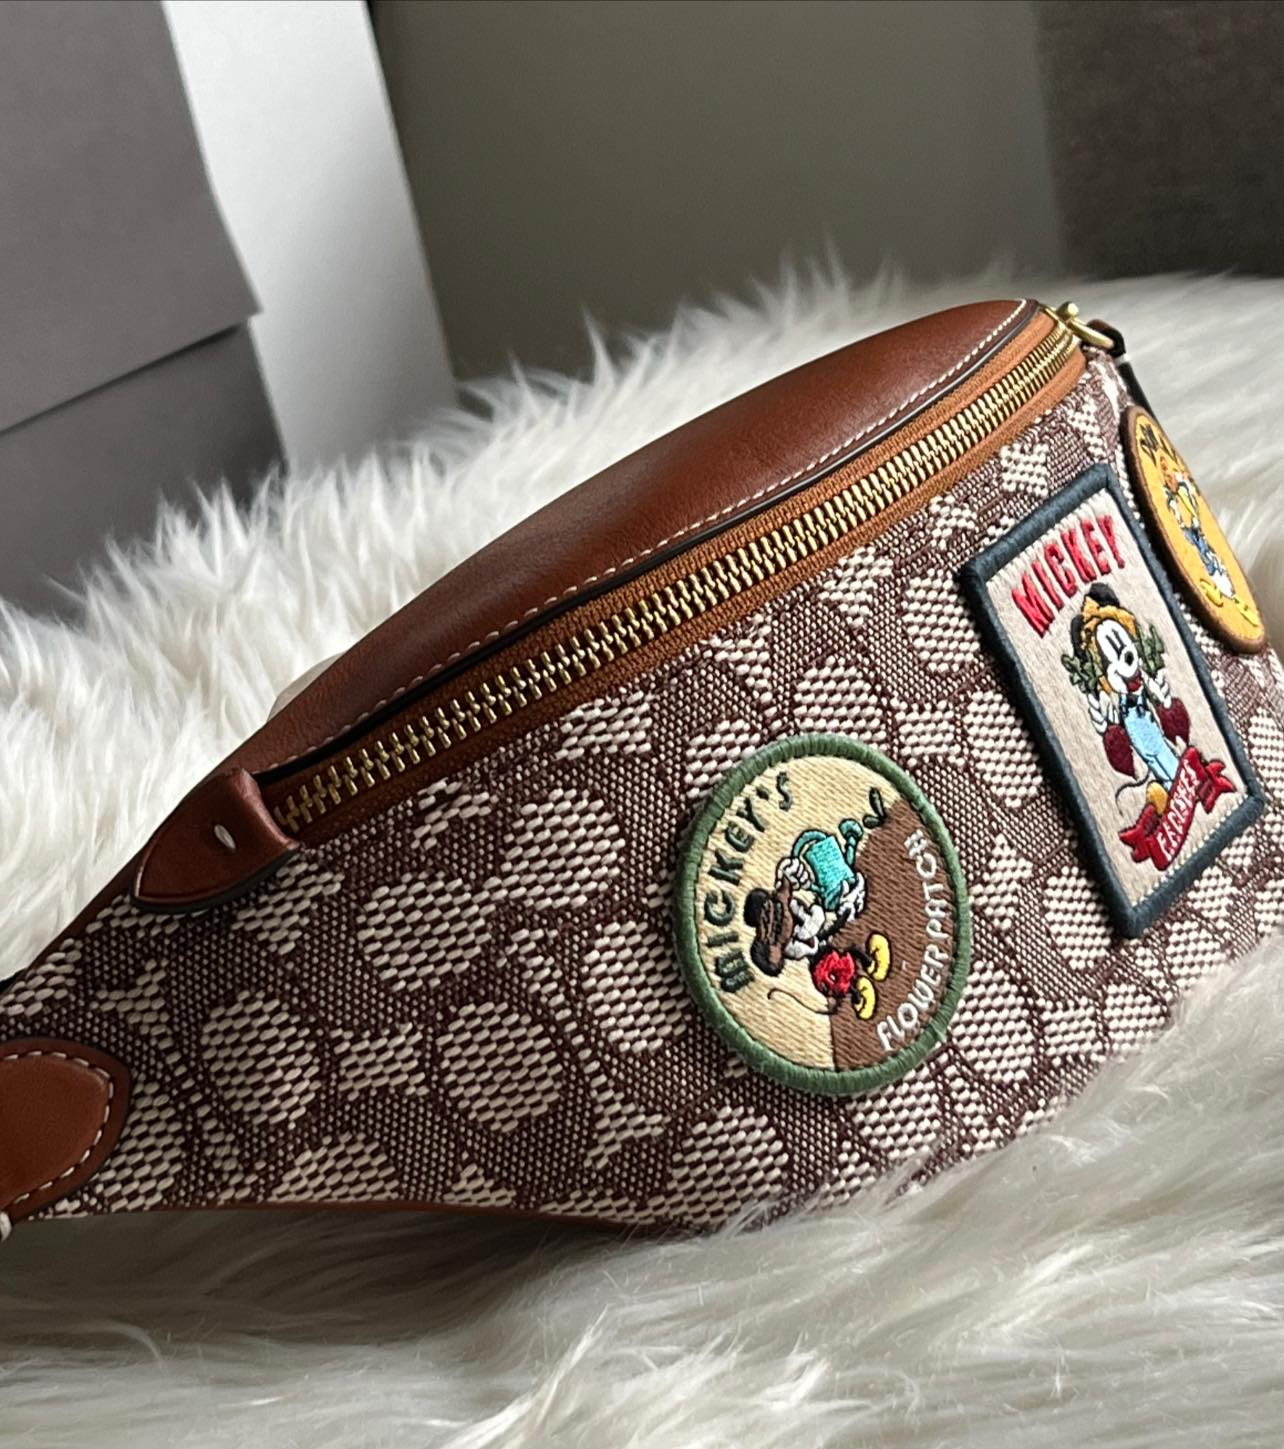 Disney X Coach Charter Belt Bag 7 in Signature Textile Jacquard with Patches